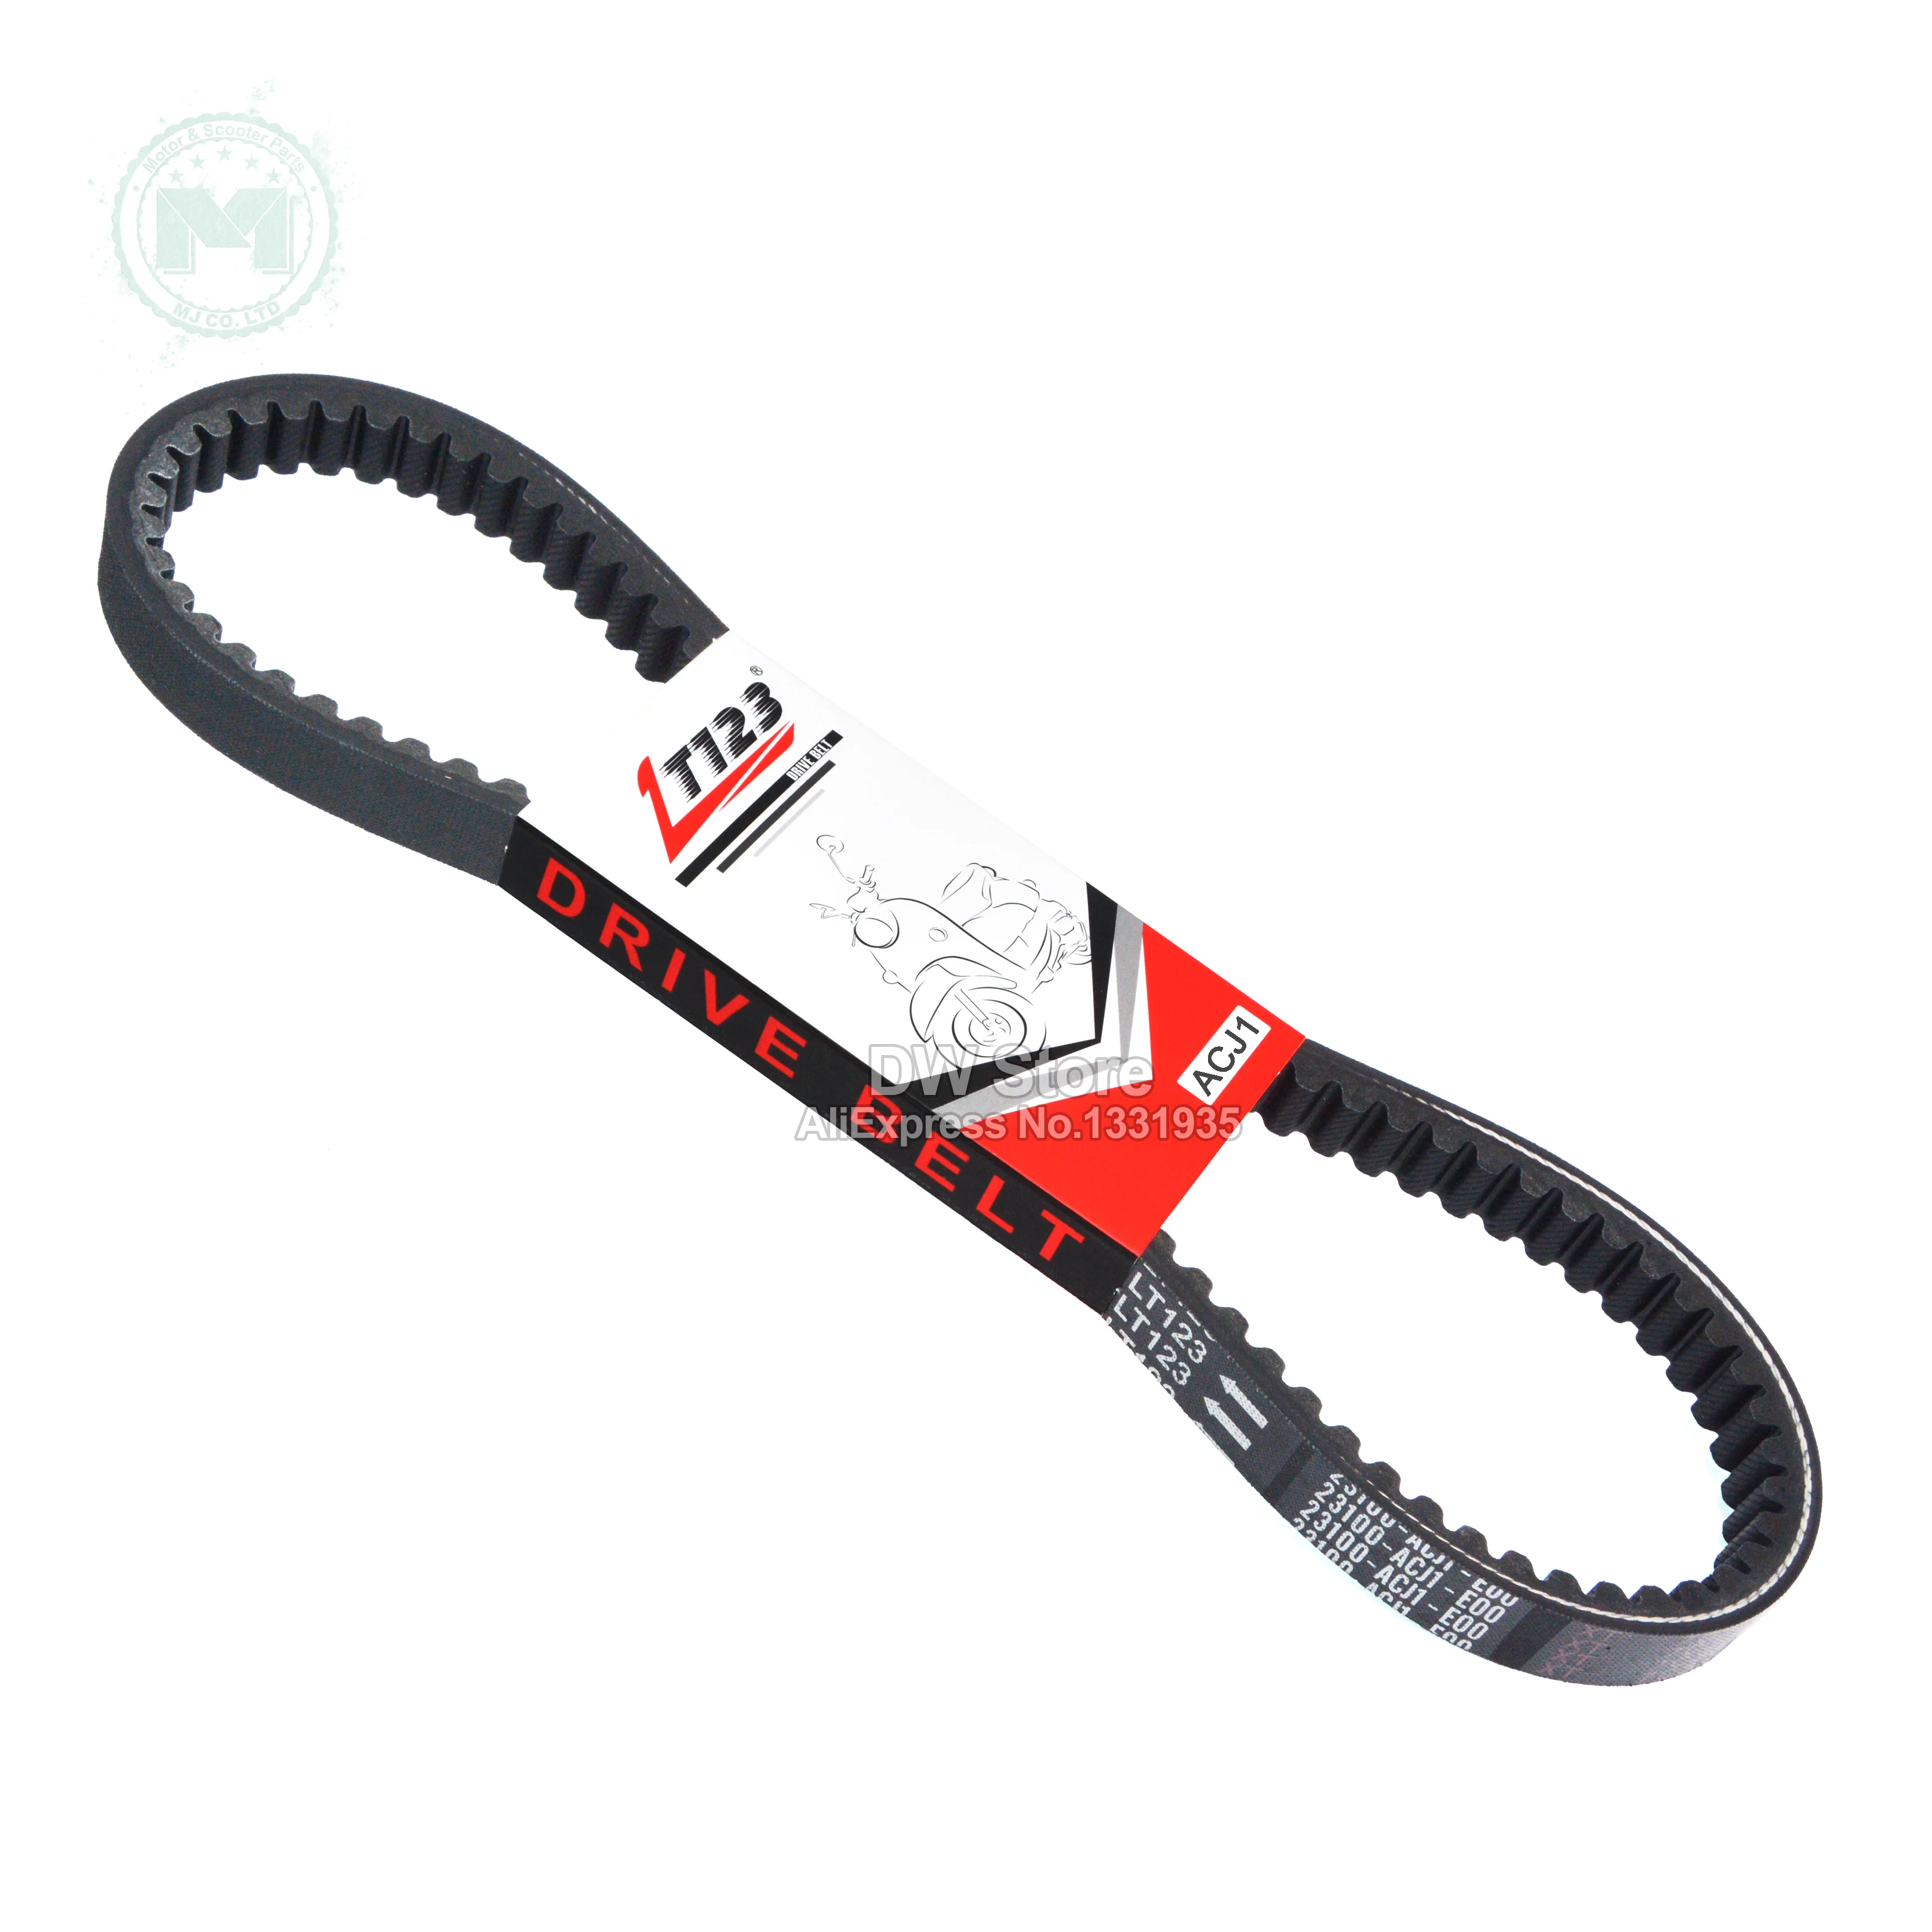 

LT123 23100 ACJ1 E00 Motorcycle scooter hight quality rubber drive belt For Kymco 125